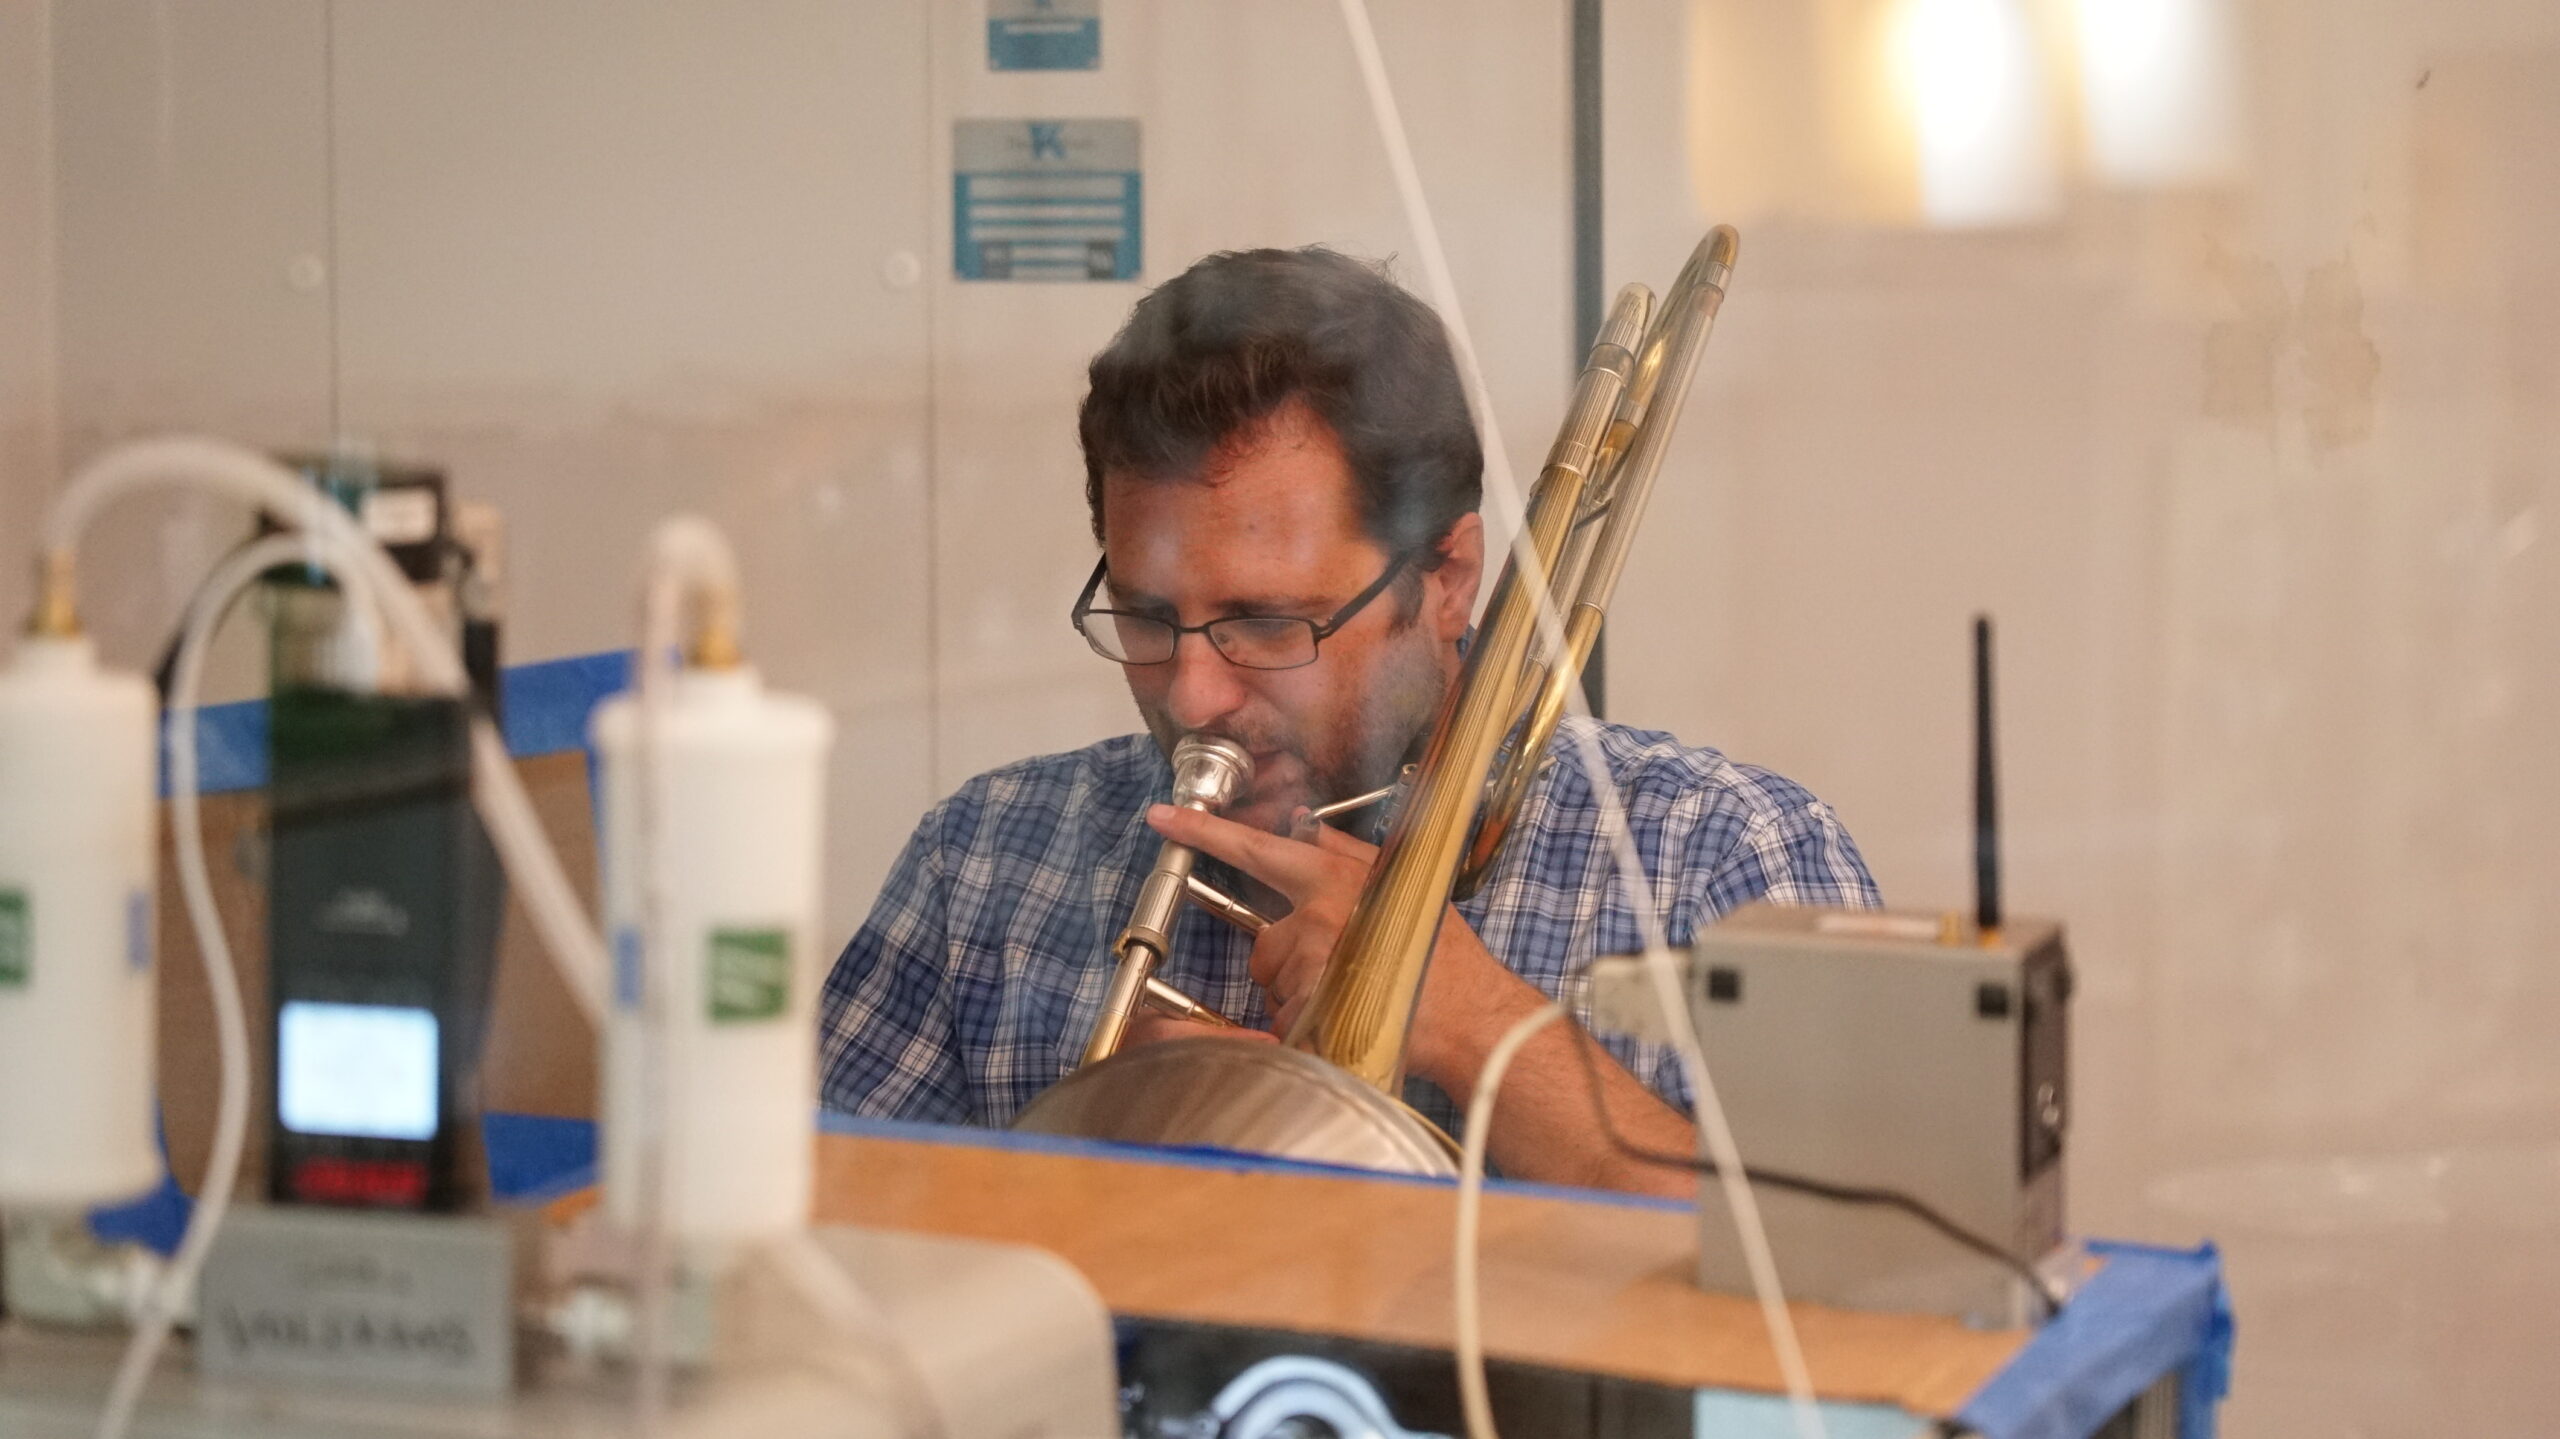 CSU researchers enlisted dozens of musicians to measure aerosol emissions. Results from instrument playing have not yet been officially released, but they say brass instruments tend to emit a lot more particles than woodwinds.